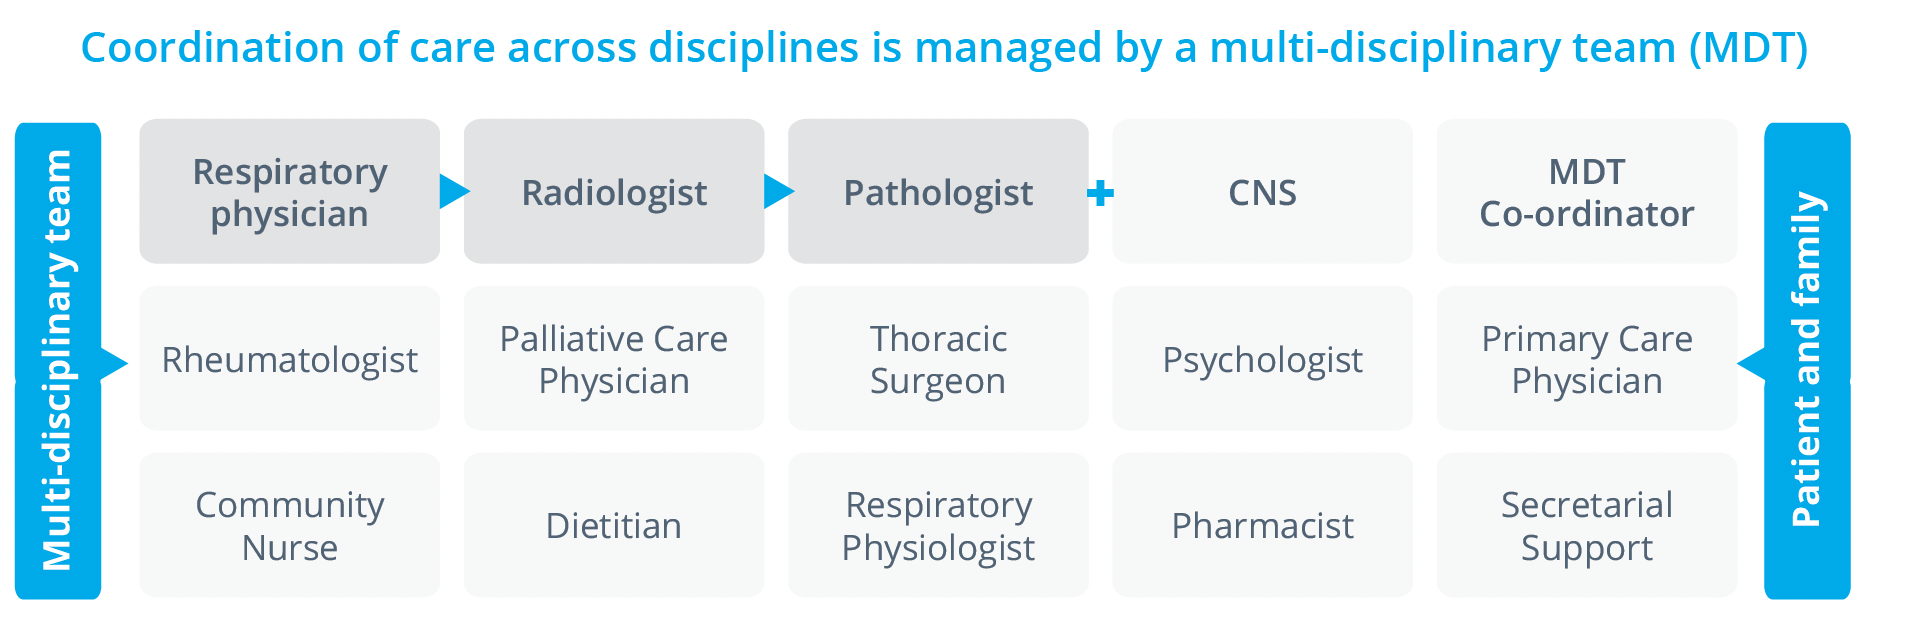 MDT coordination of care, including respiratory physicians, radiologists and pathologists